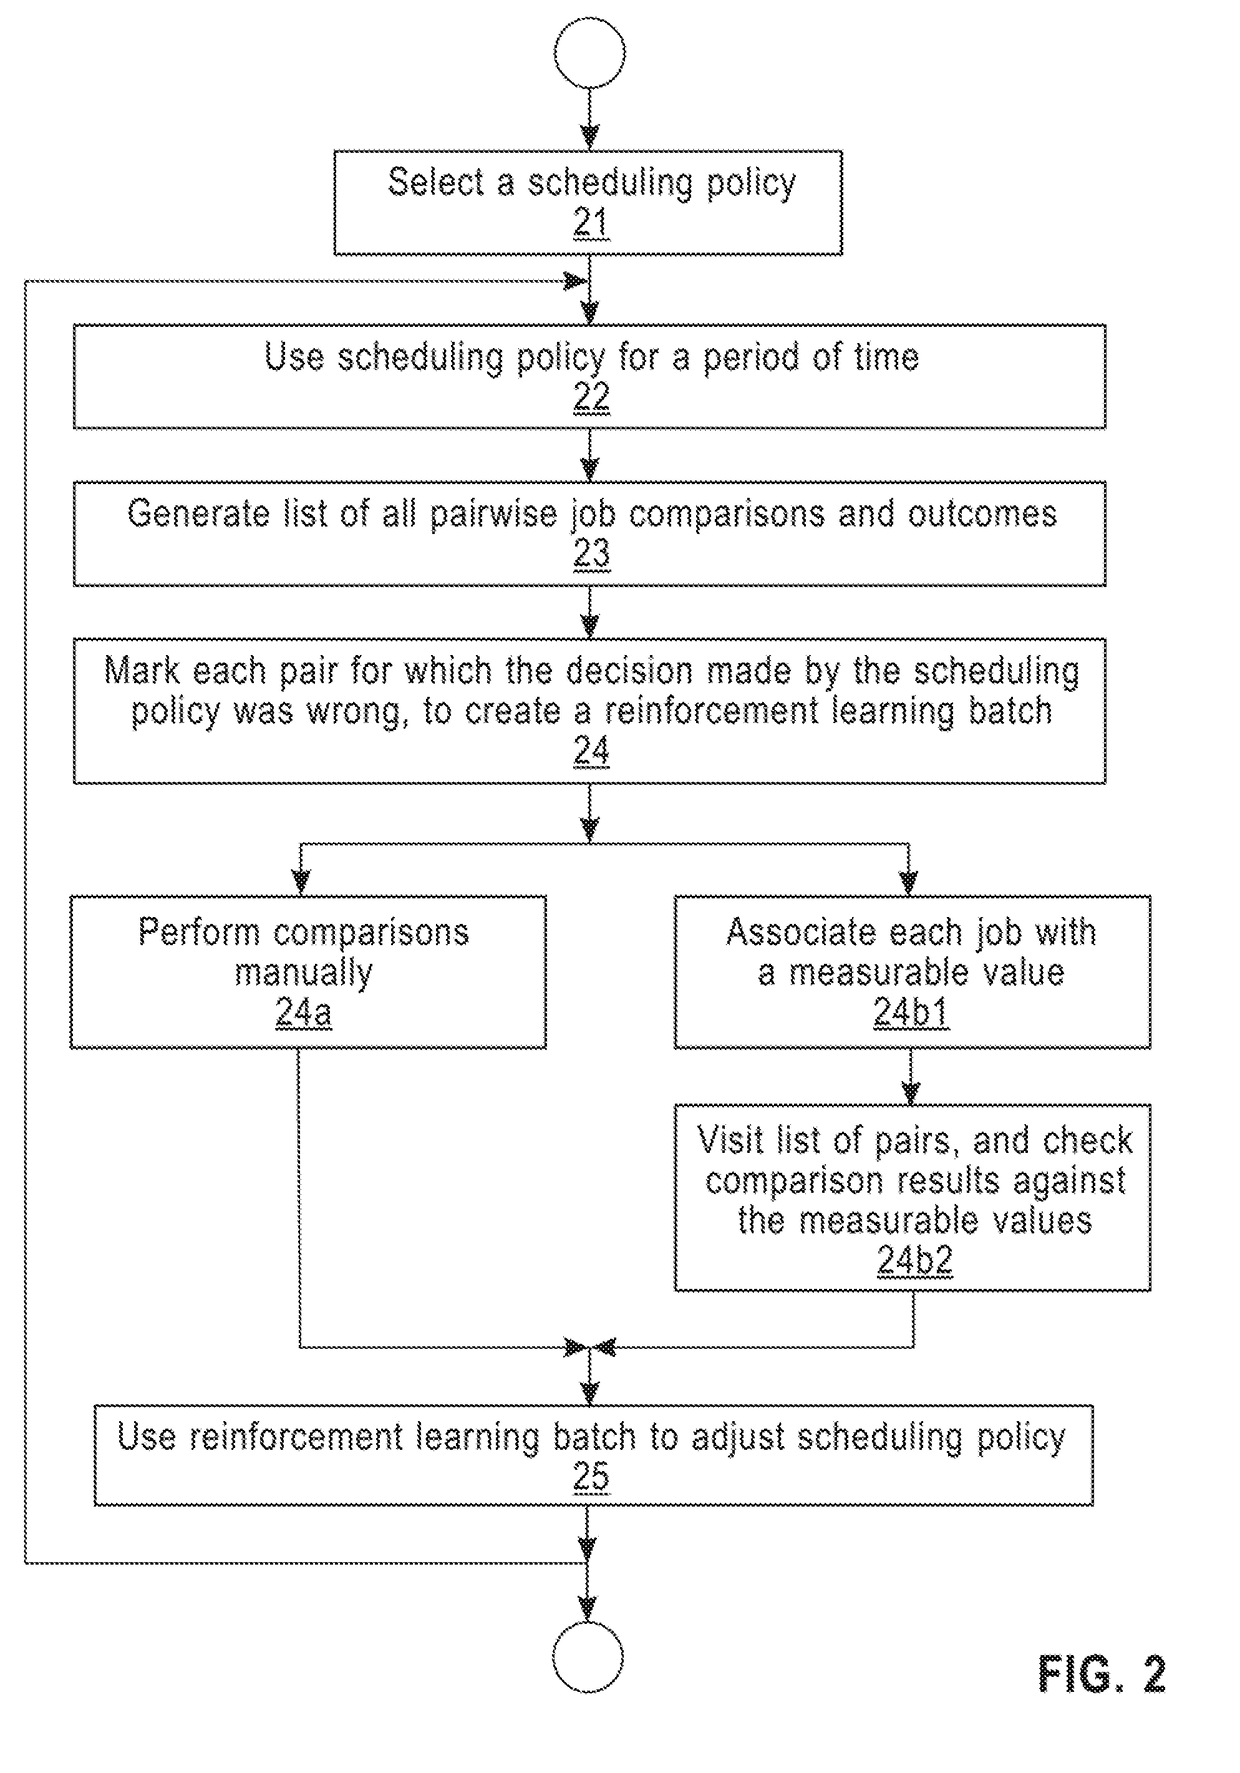 Automated generation of scheduling algorithms based on task relevance assessment